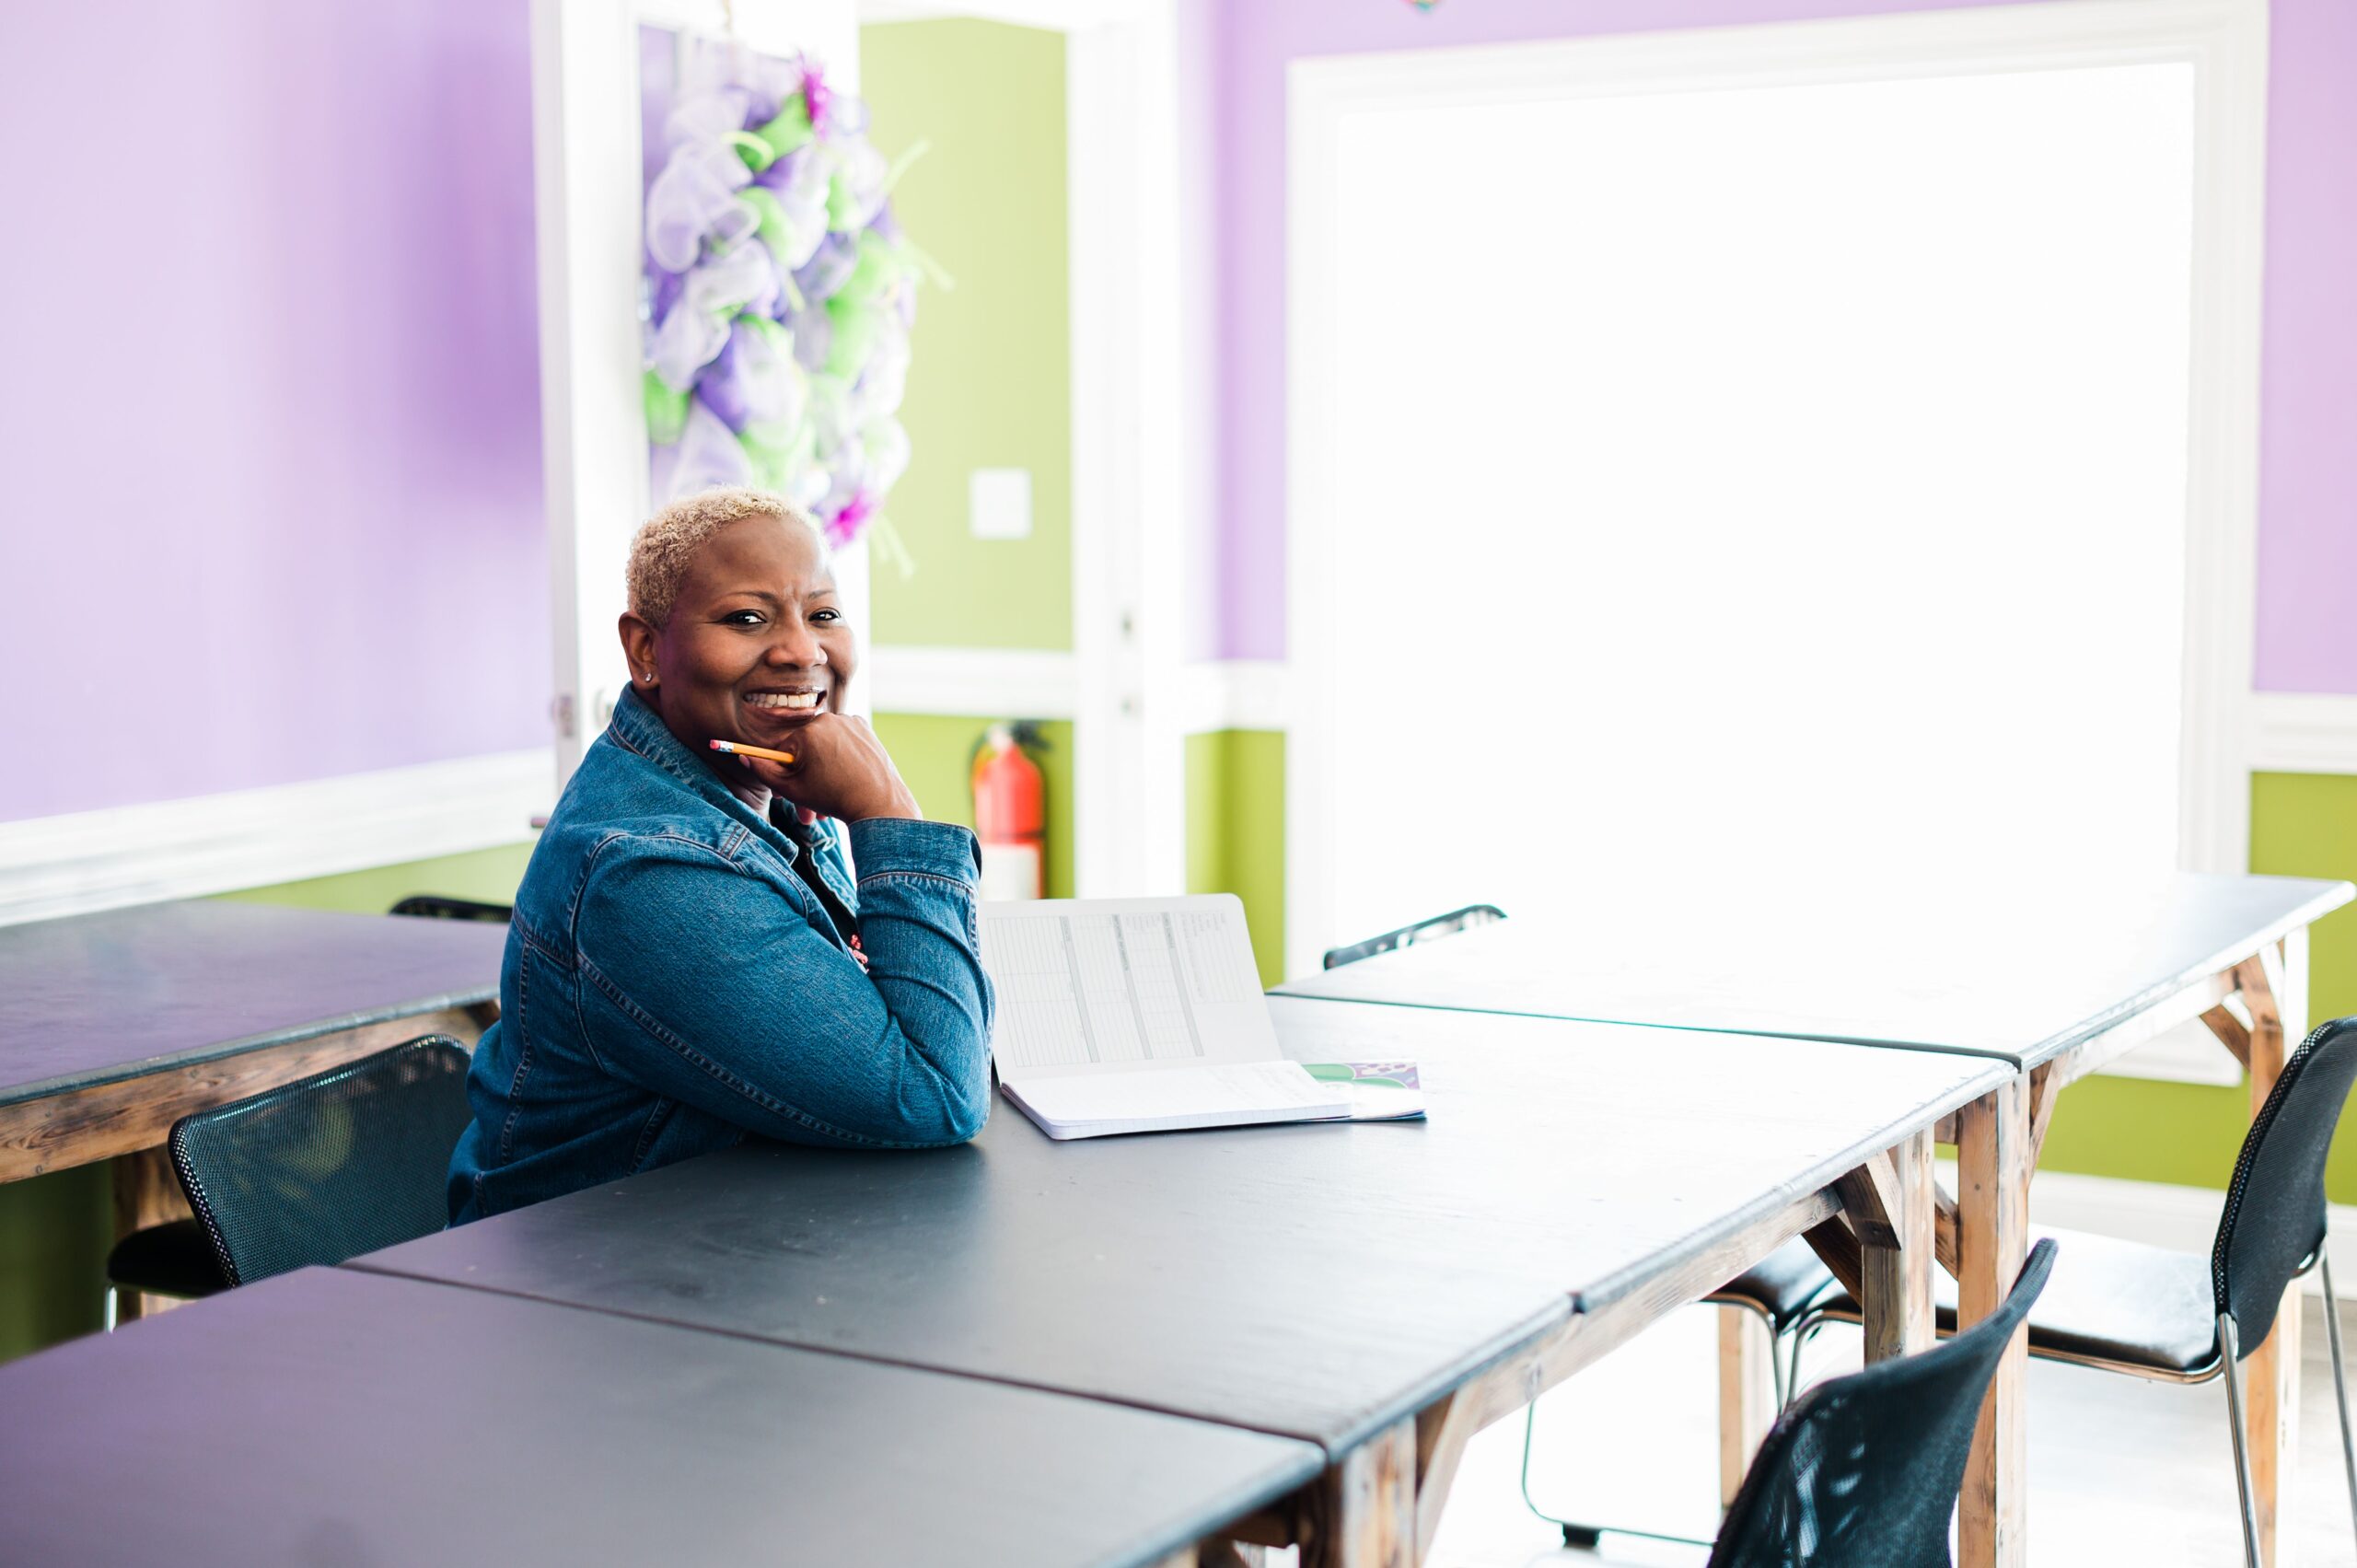 Jakki Davis, executive director and co-founder of D-UP in High Point, NC, sits at a table smiling and taking notes.